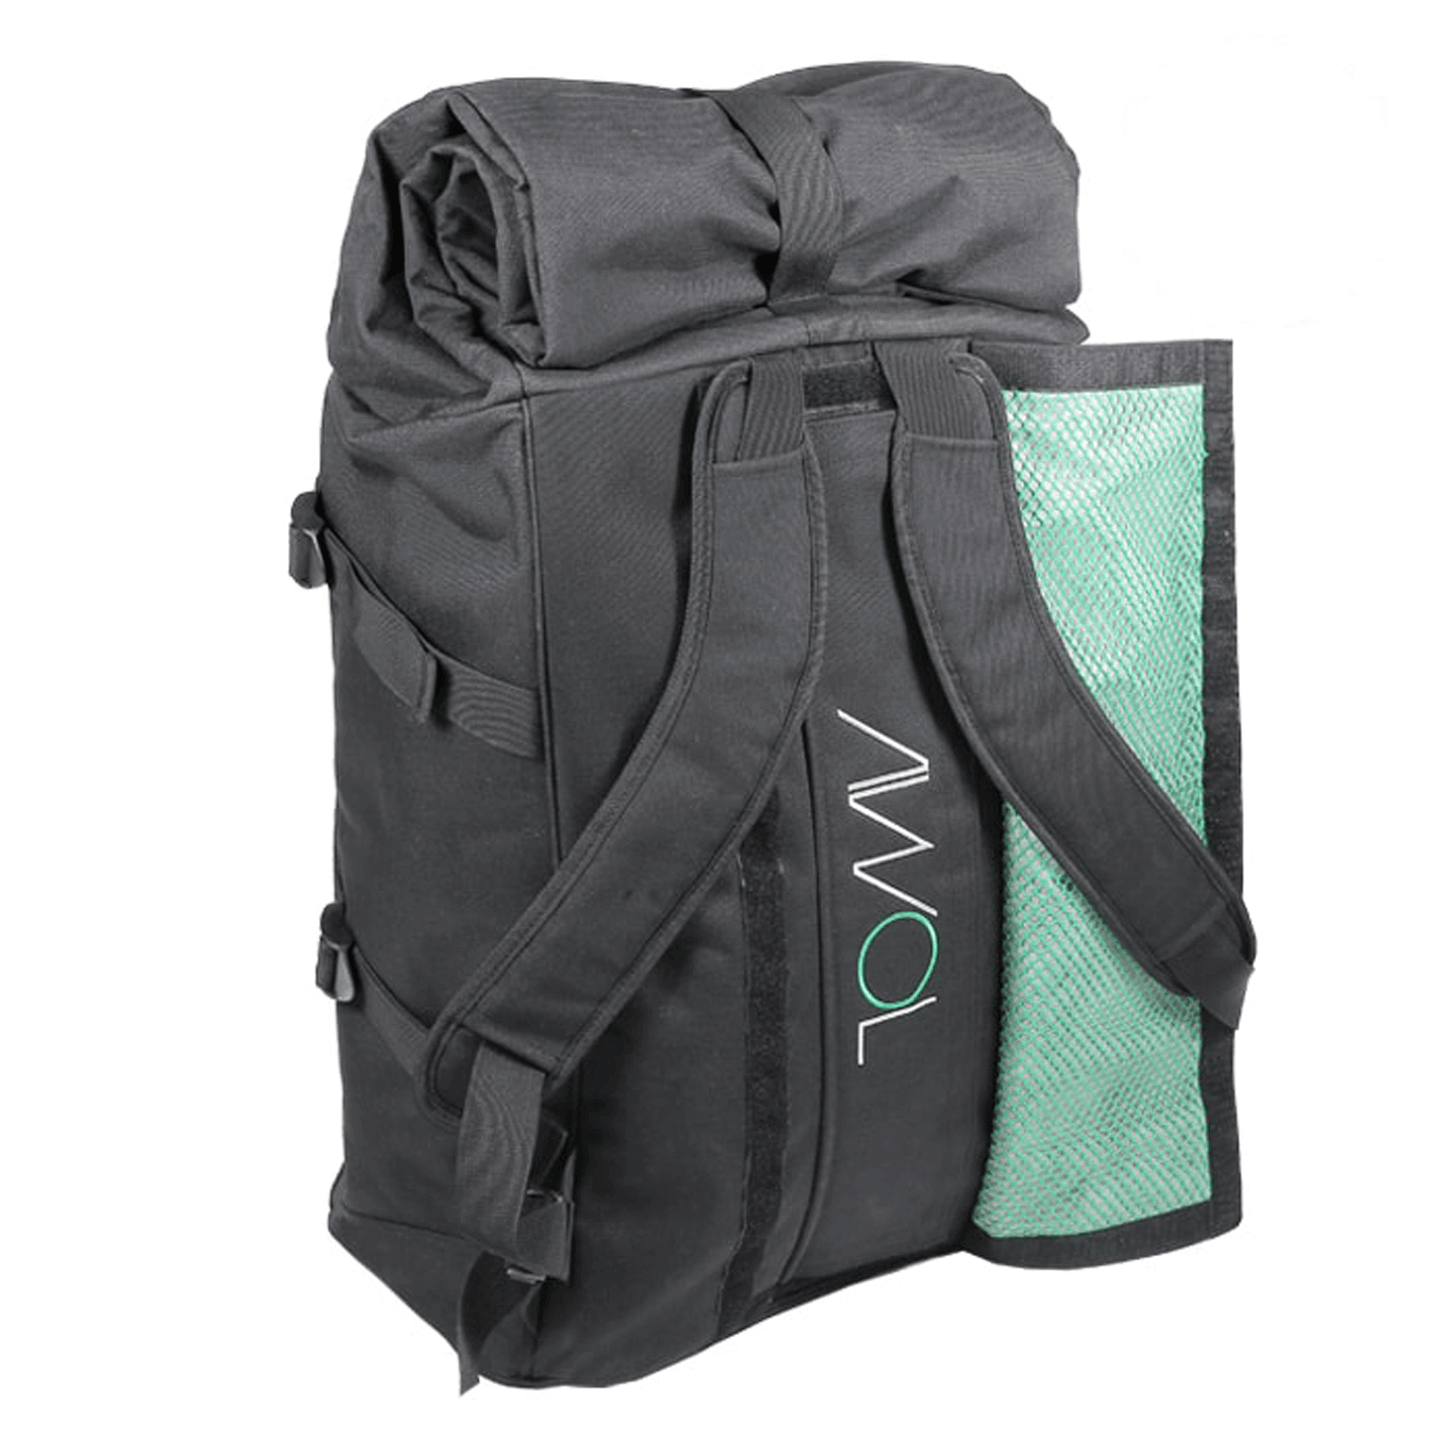 AWOL CARGO X-Large Roll-Up Backpack 886113 Harvest & Extraction 816731019750